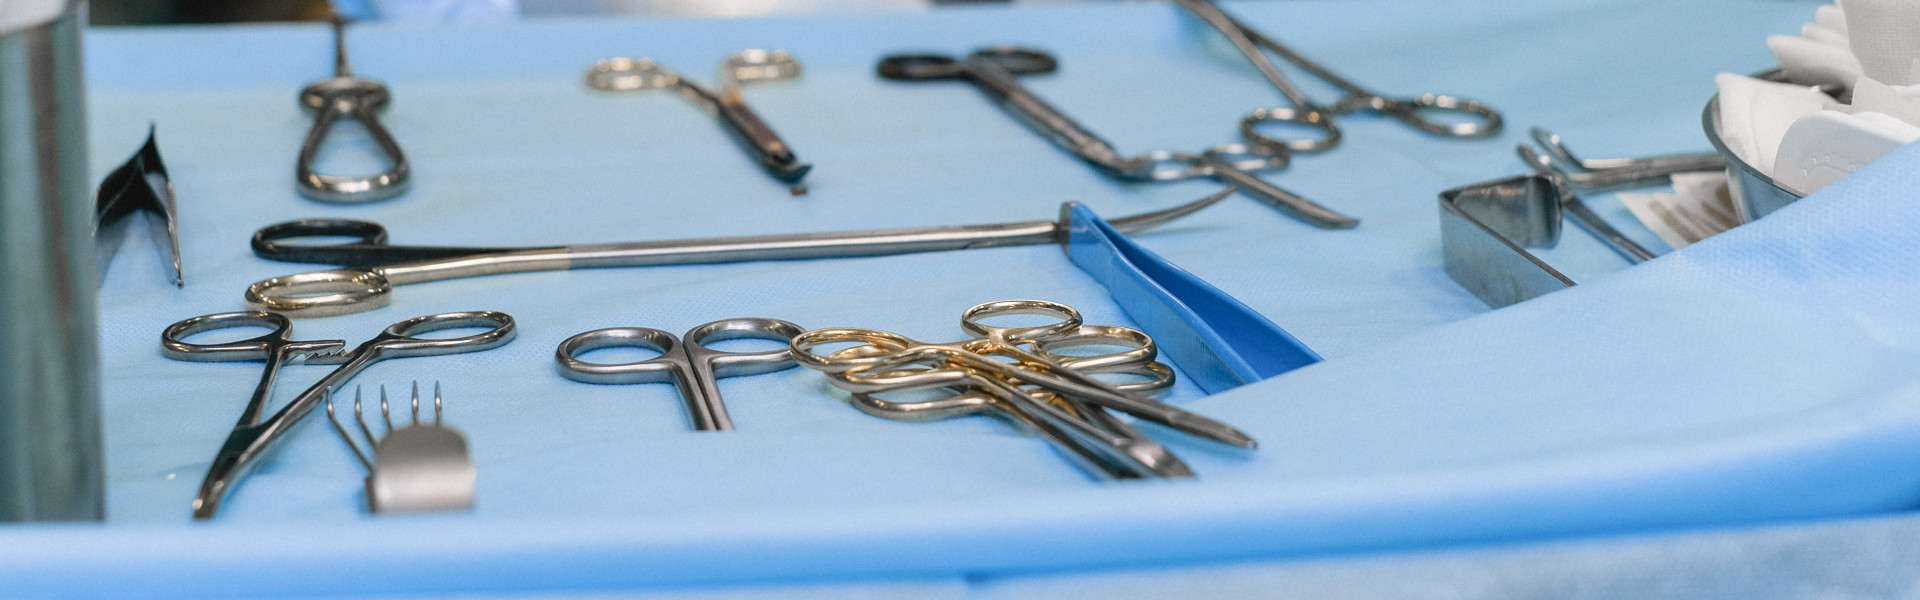 surgery operating theatre instruments